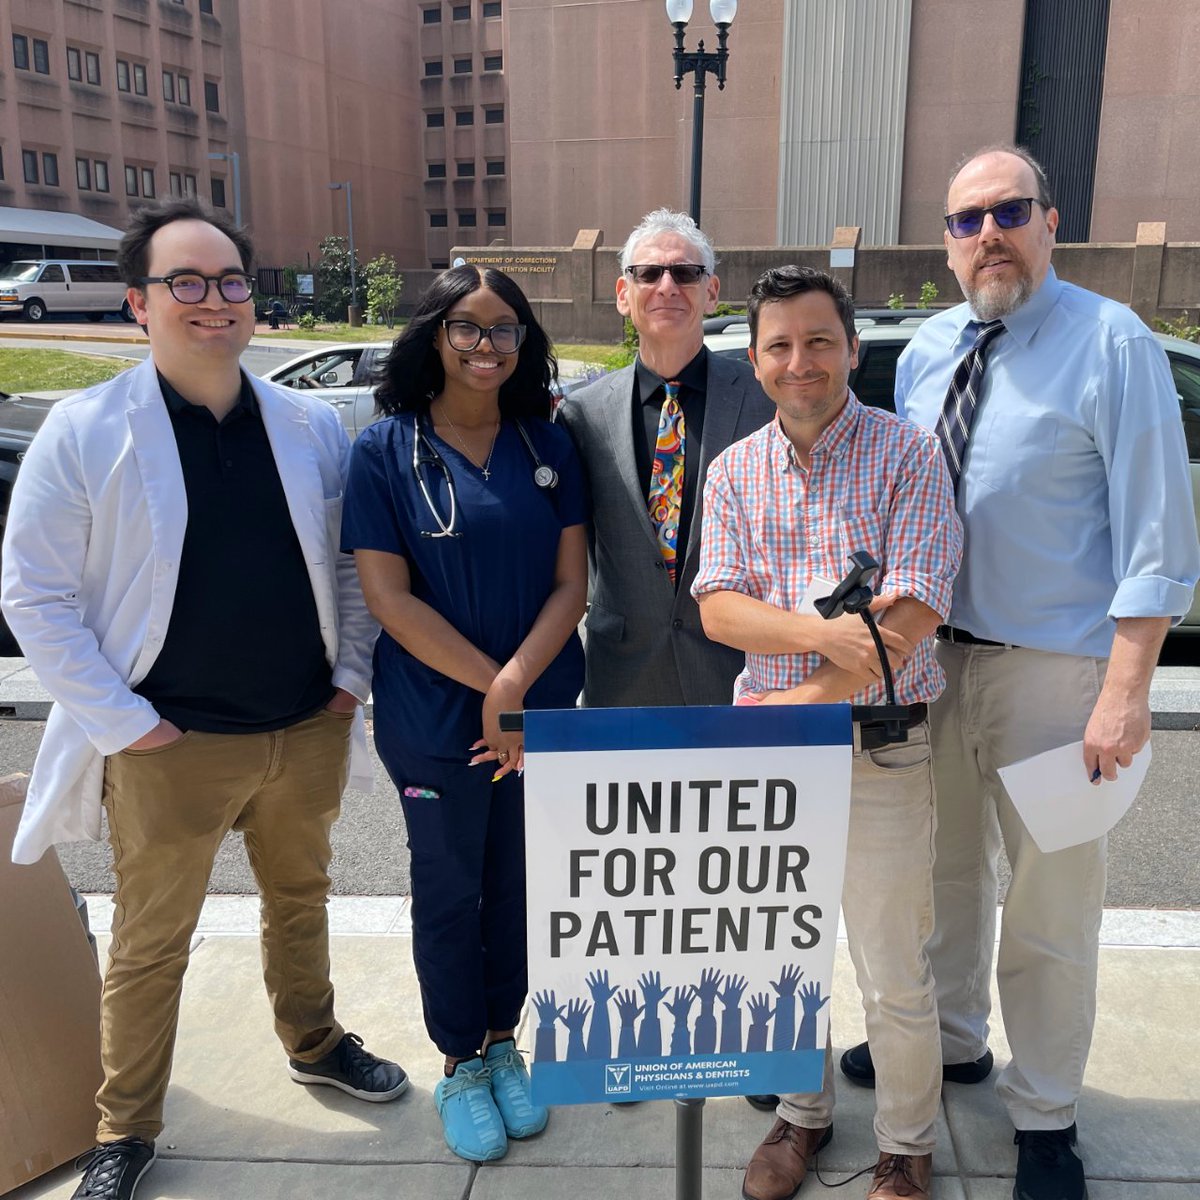 The UAPD and our members at Unity Health Care yesterday in front of the DC jail for our press conference announcing the unfair labor charges filed against management ✊ #1u #solidarity #union #unionize #unionstrong #unionproud #unionpower #healthcare #medicine #uapdtakesaction